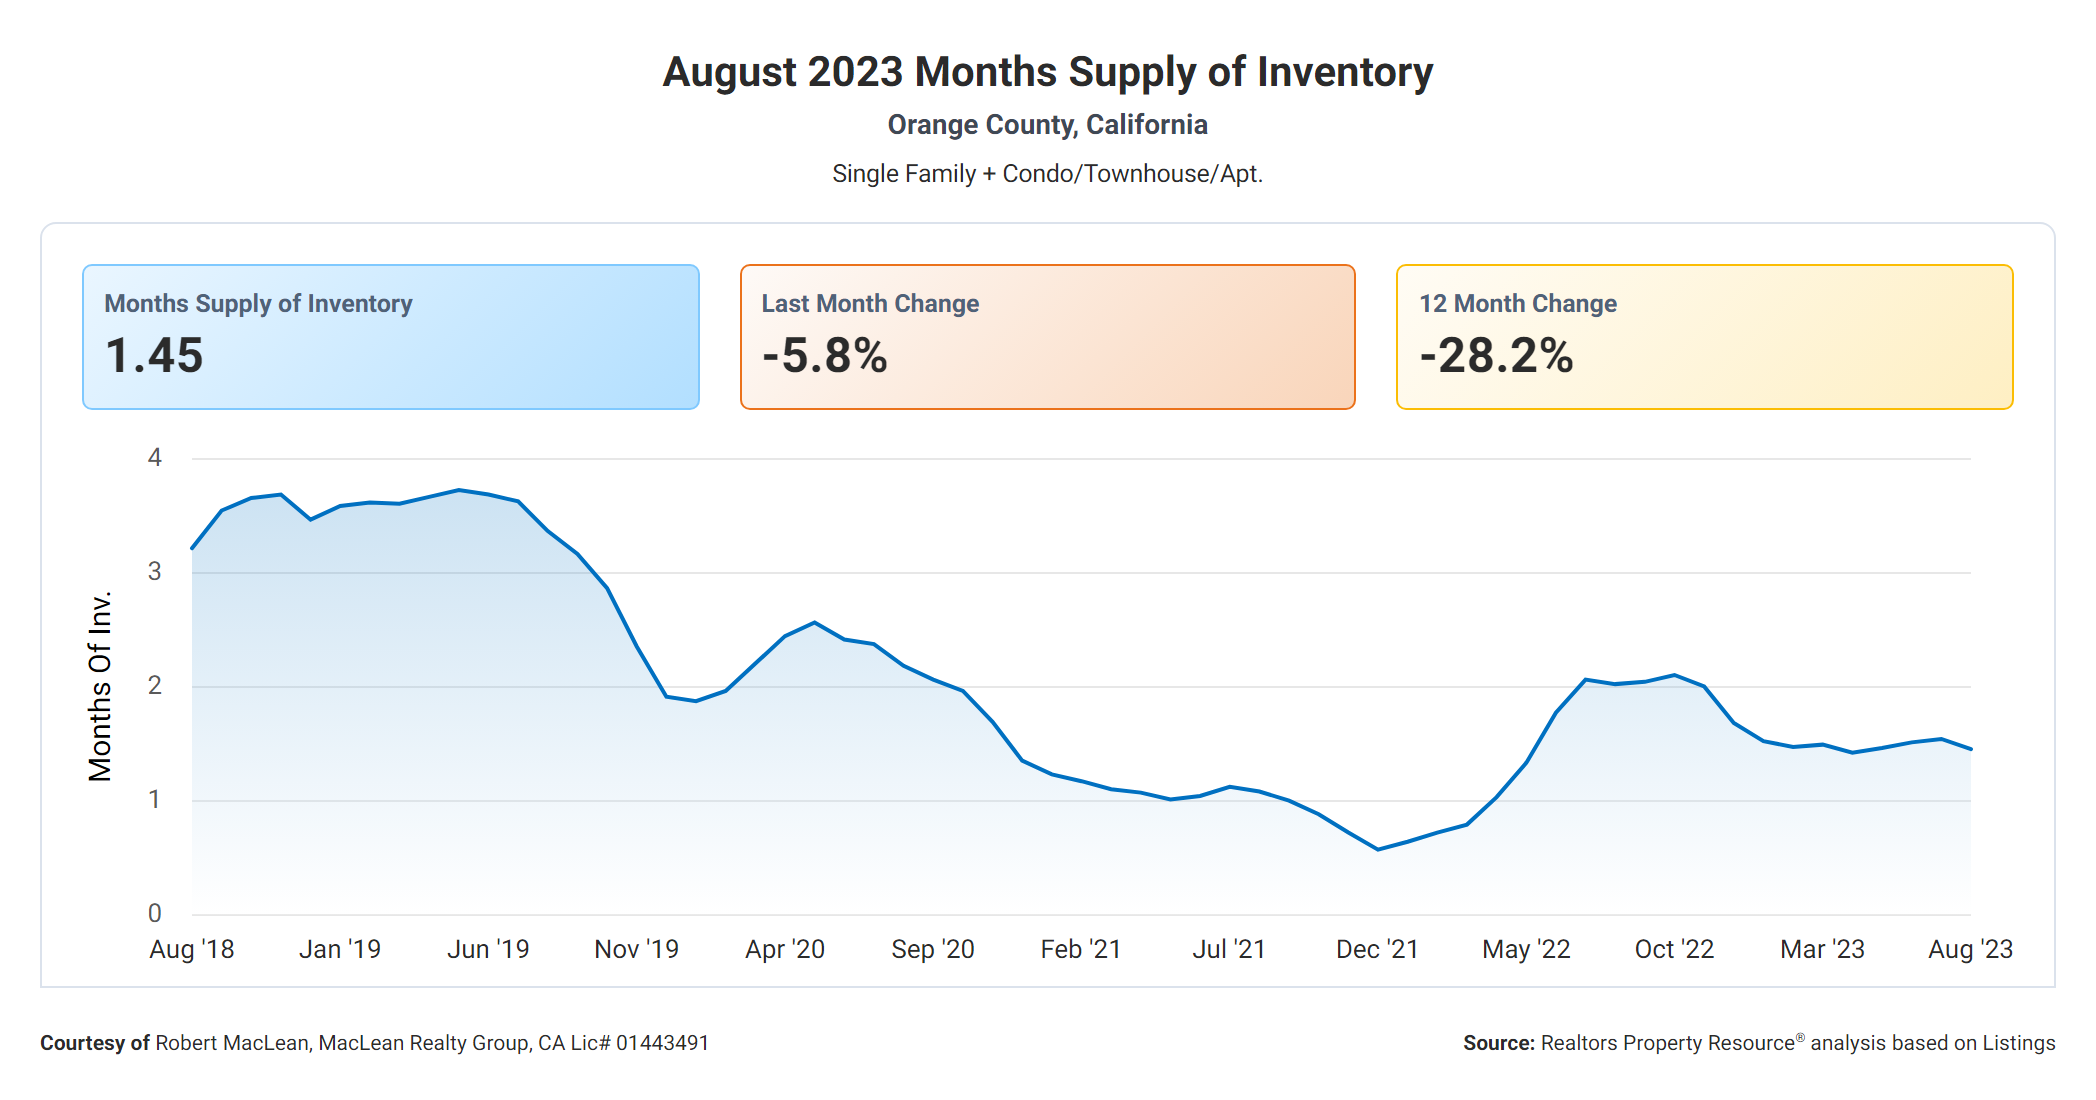 August 2023 Months Supply of Housing Inventory for Orange County